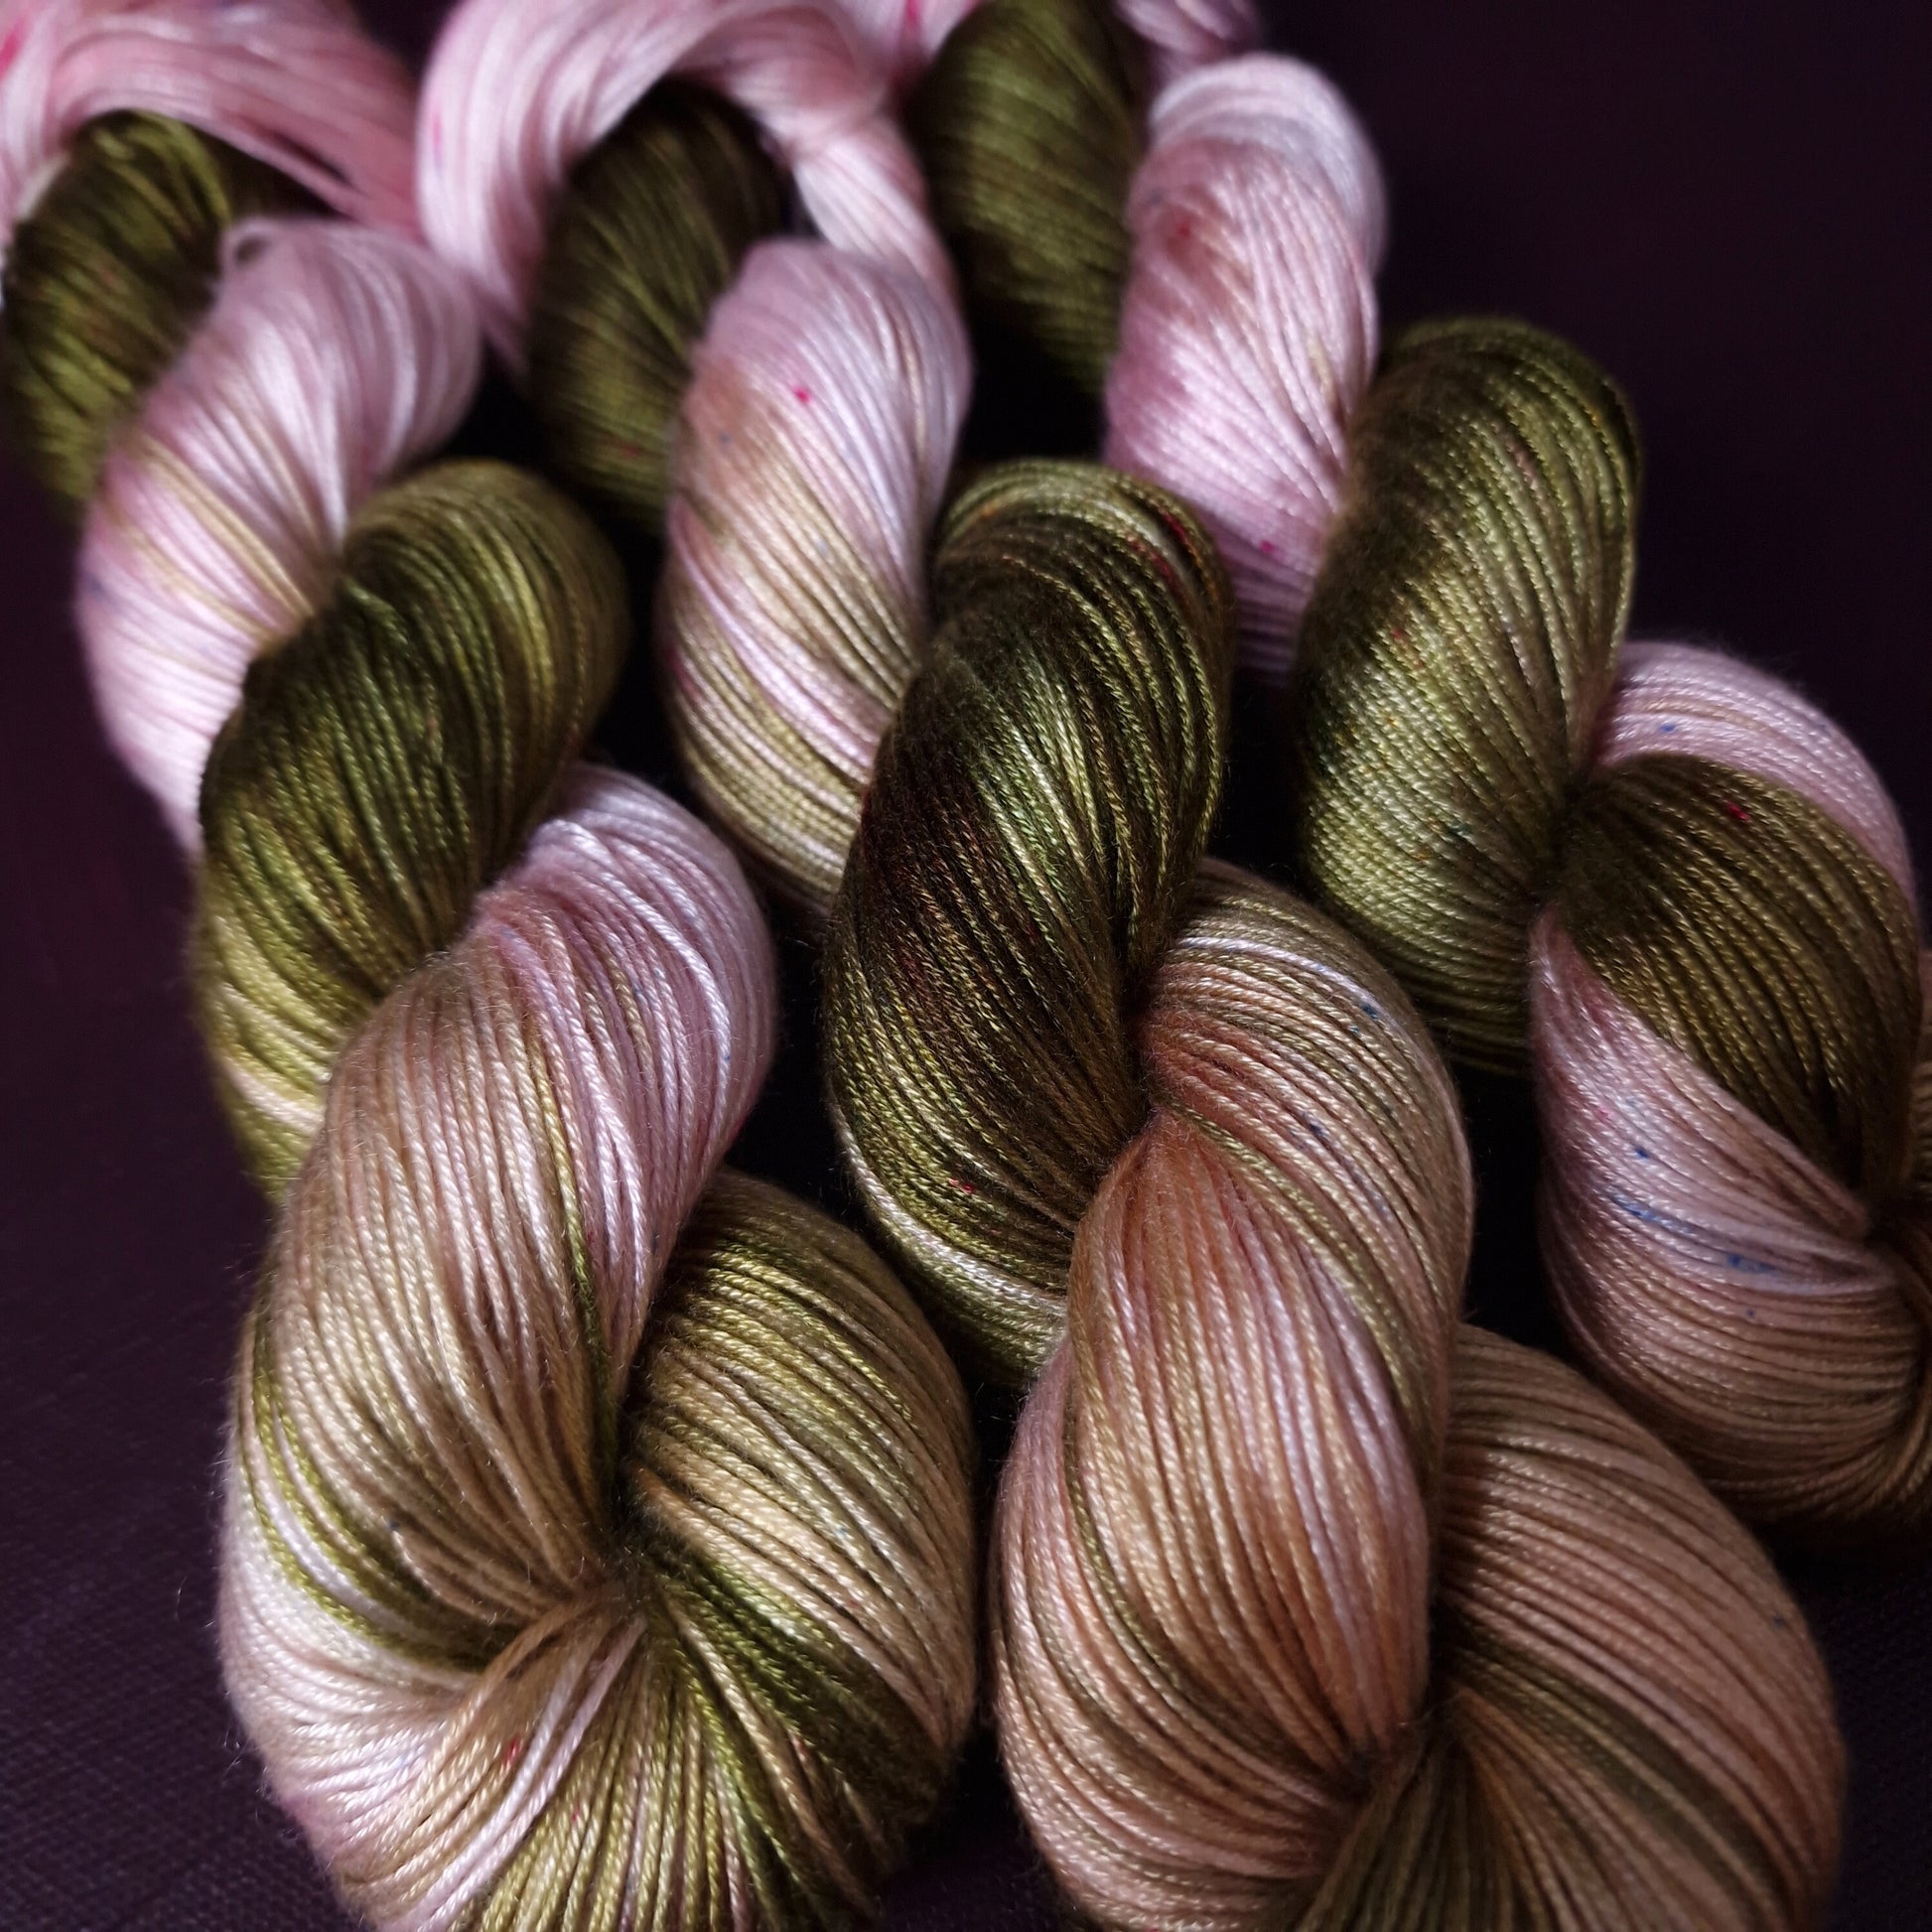 Hand dyed yarn ~ Tulip Bouqet *** Dyed to order ~ fingering / DK weight tencel OR bamboo yarn, vegan, hand painted